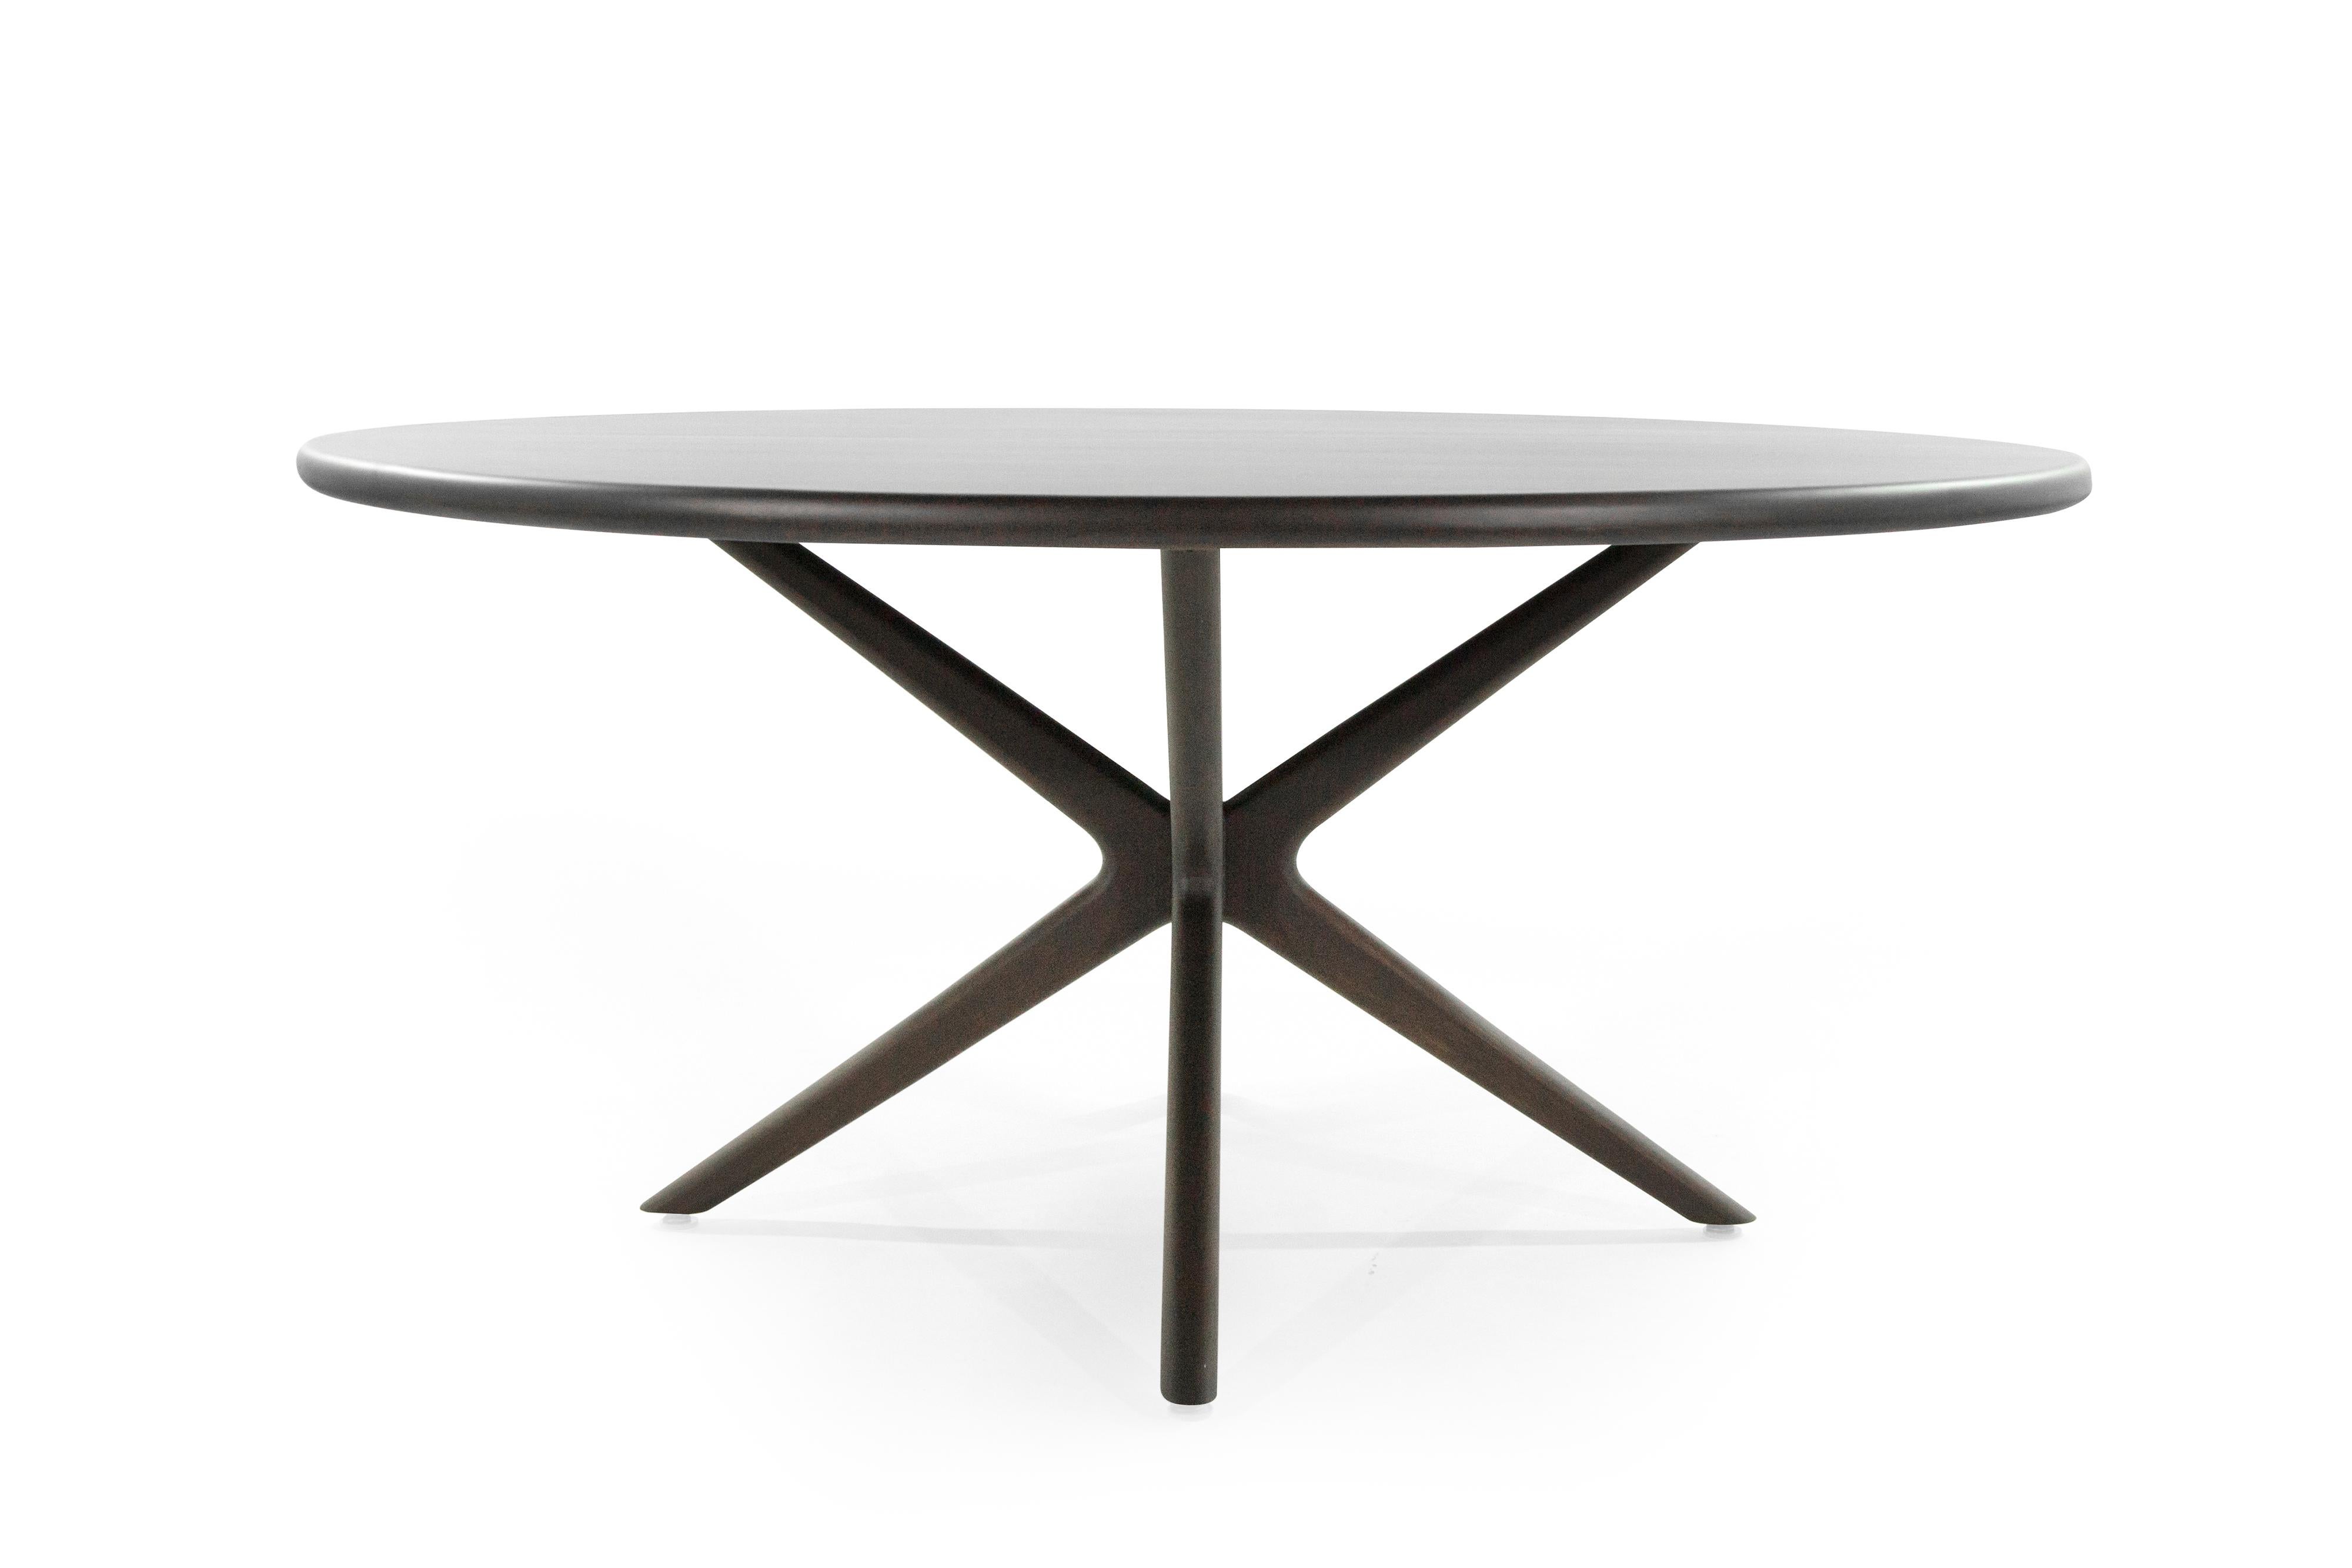 Stamford Modern continues to expand its collection of fully customizable furniture with the introduction of The Gazelle collection dining table.
Solid handcrafted walnut base provide support to 64